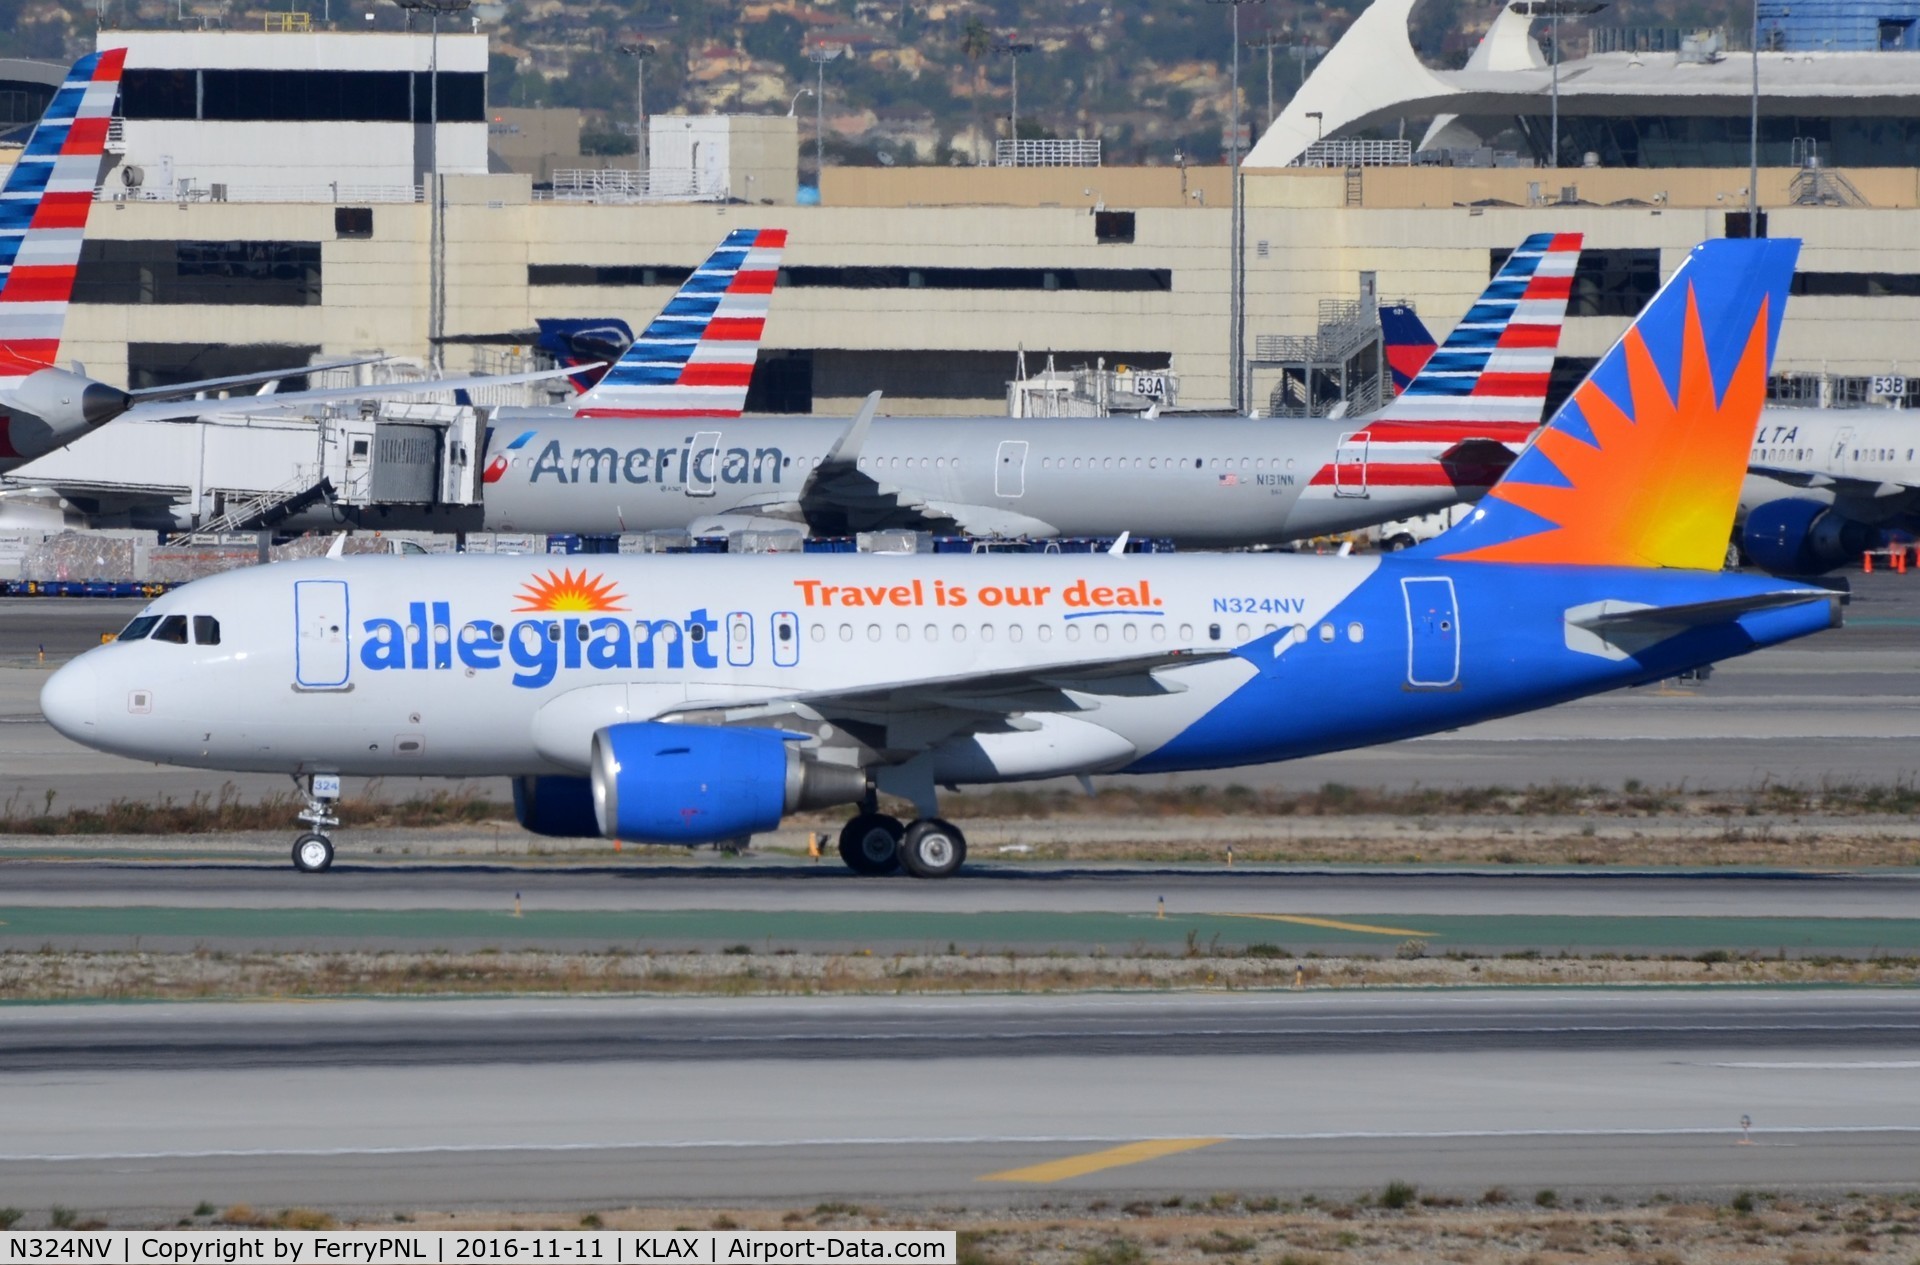 N324NV, 2006 Airbus A319-111 C/N 2709, Allegiant A319, formally operated by Easyjet as G-EZAE